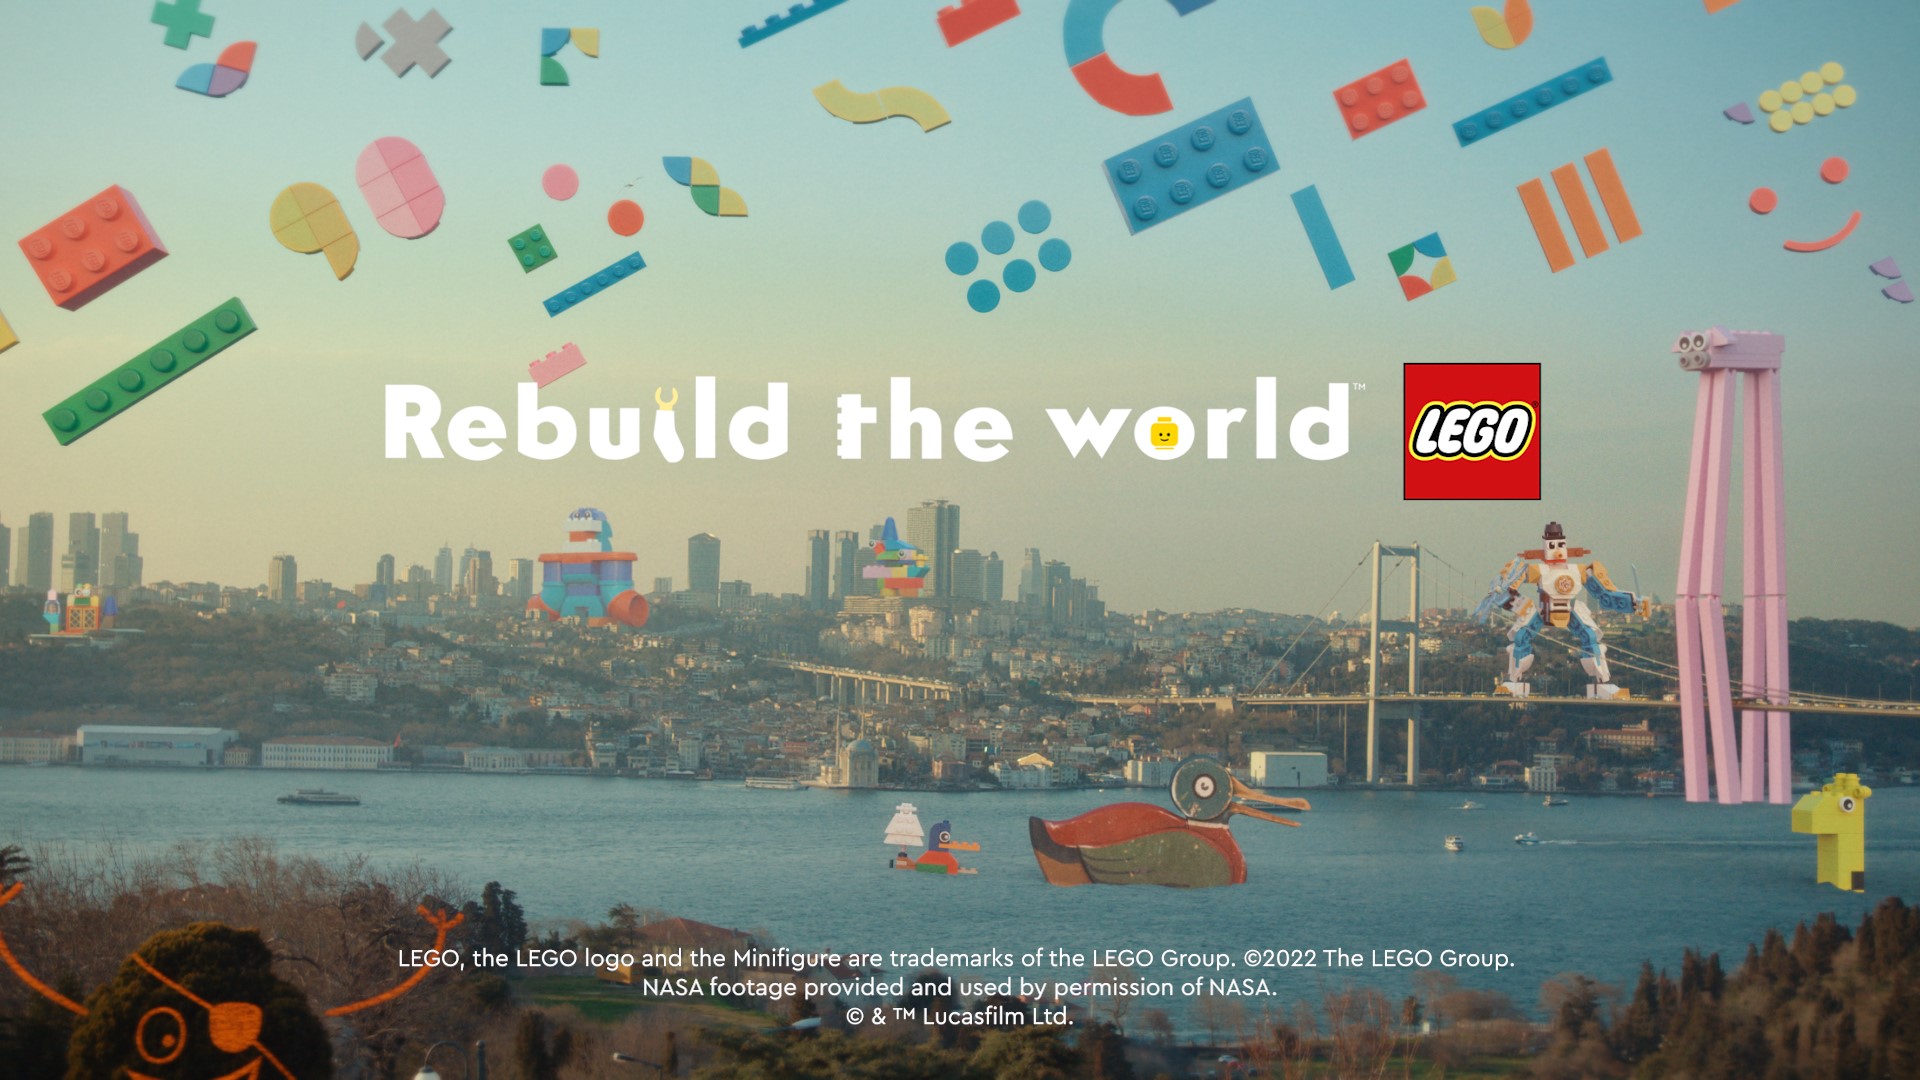 New LEGO® campaign celebrates years of Rebuilding the World through play Us - LEGO.com